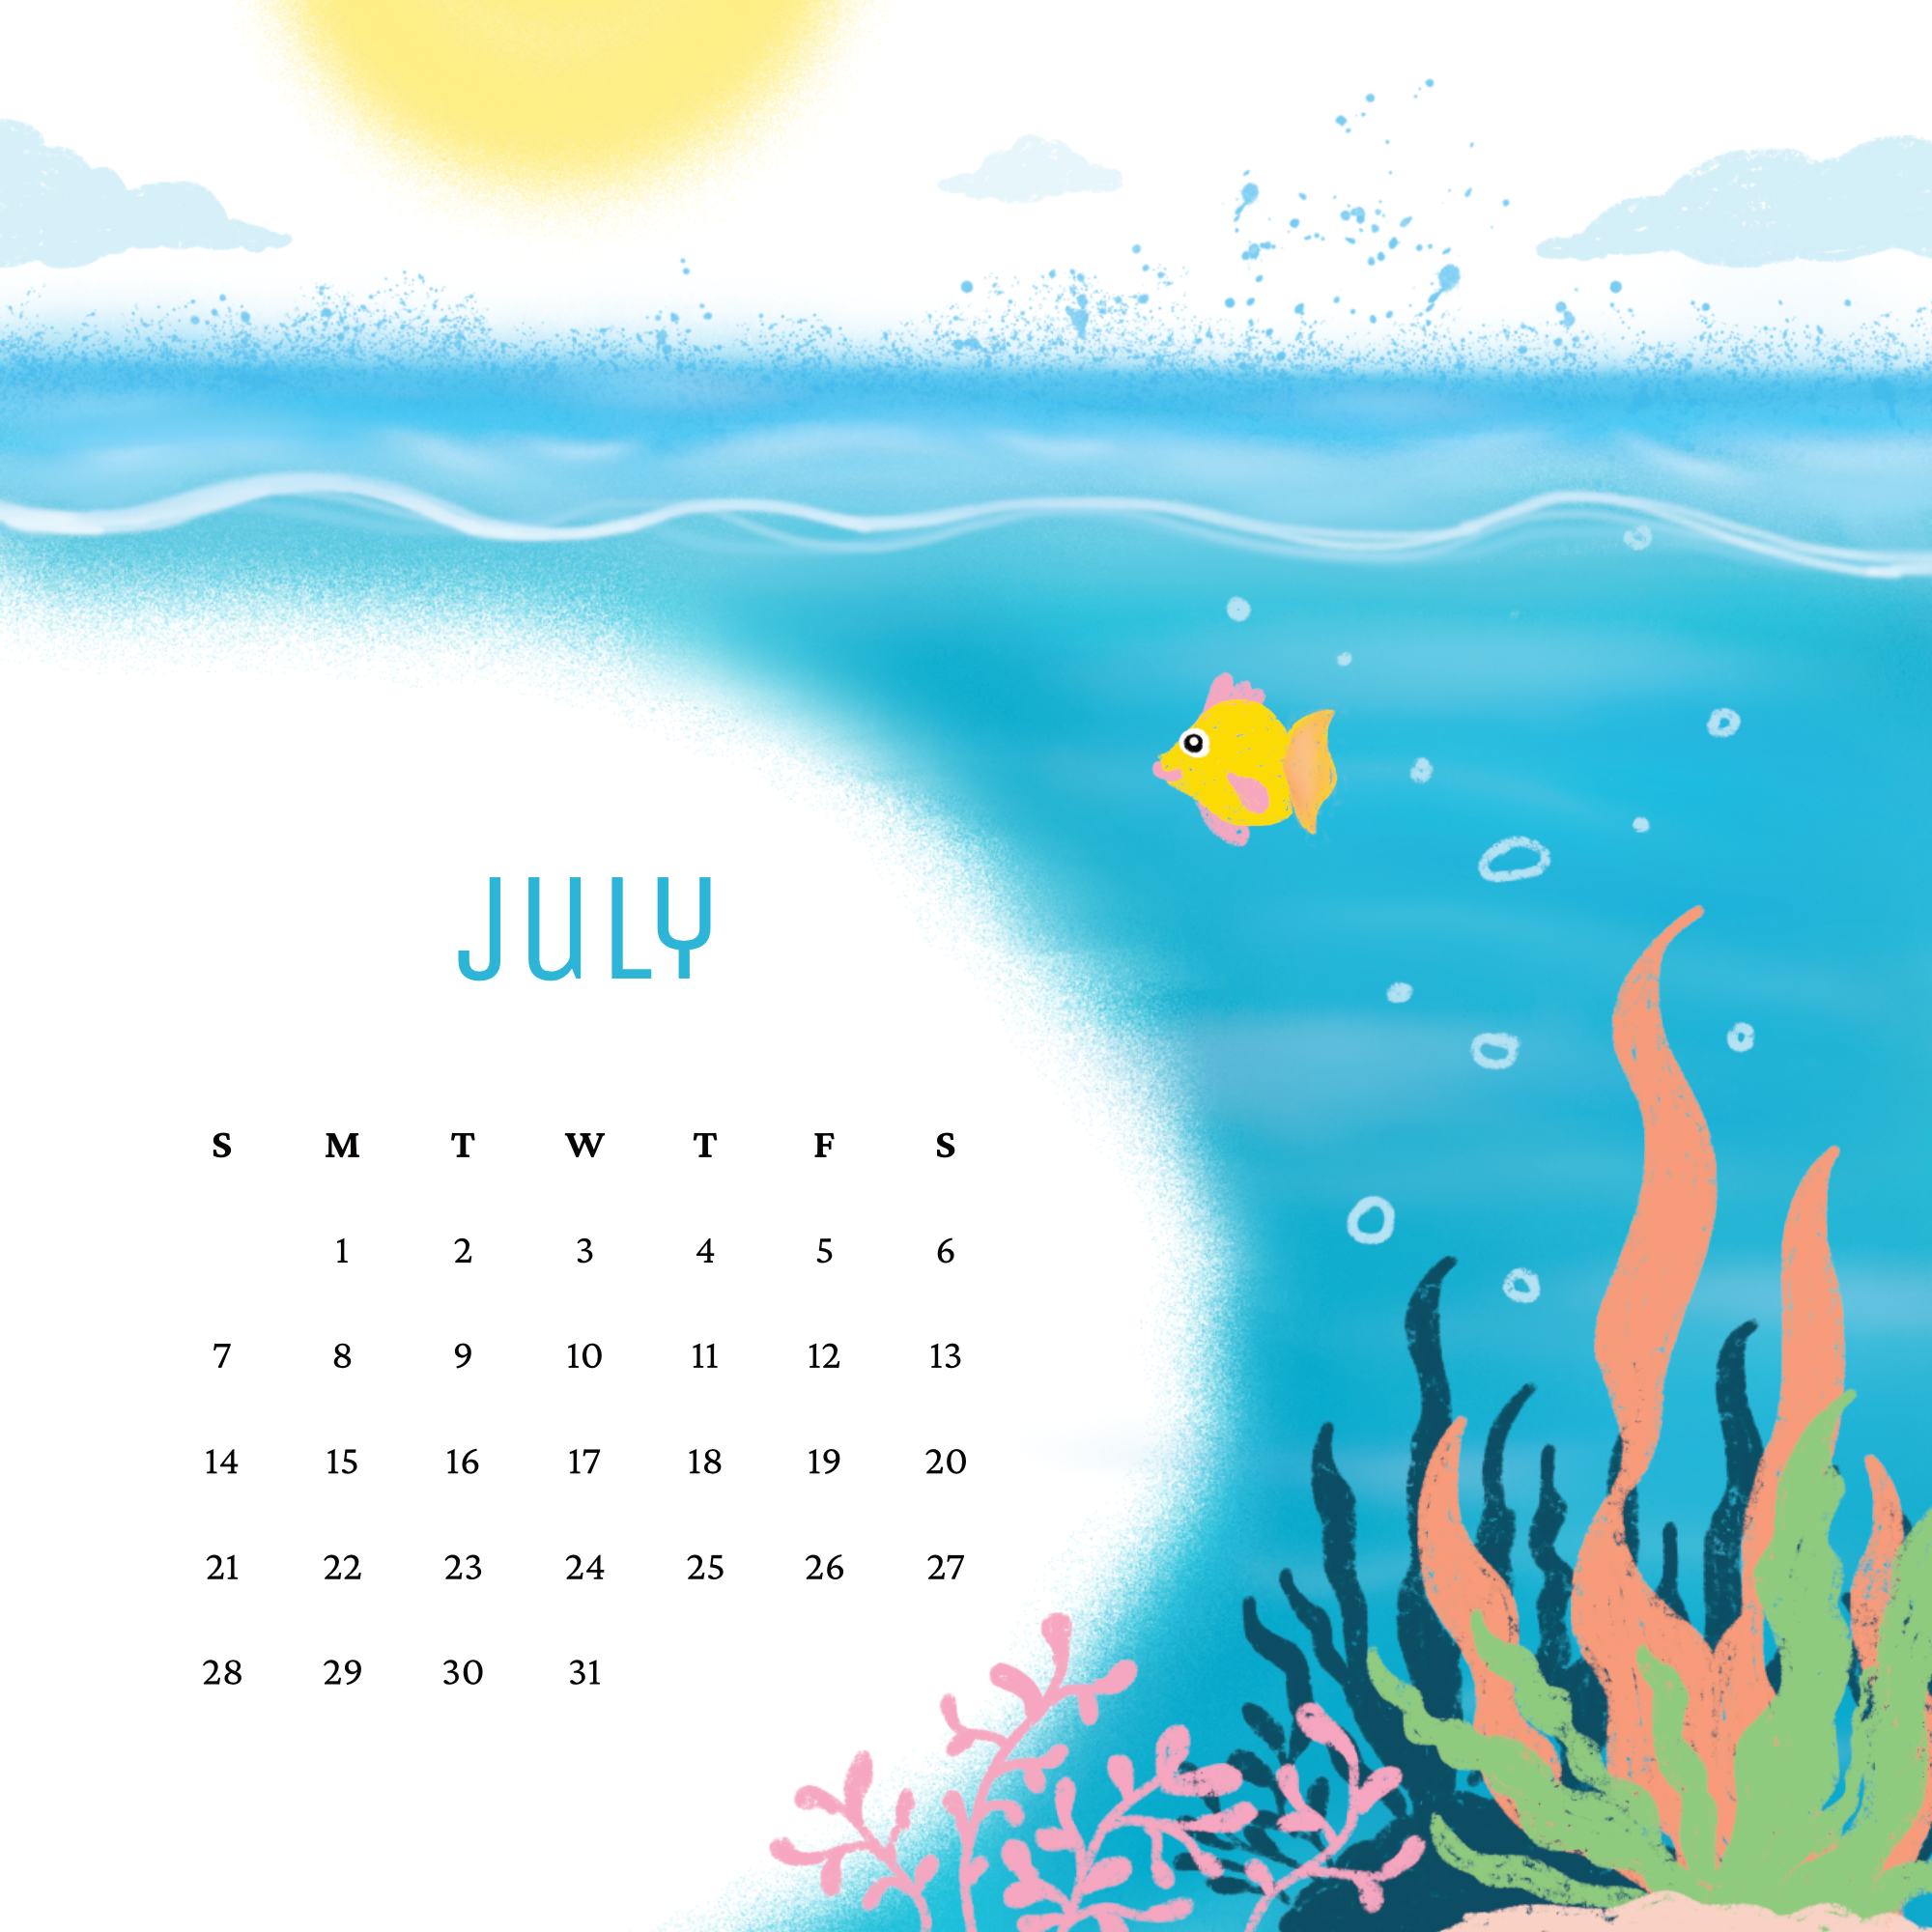 A vibrant blue underwater theme illustration of a calendar for the month of July.